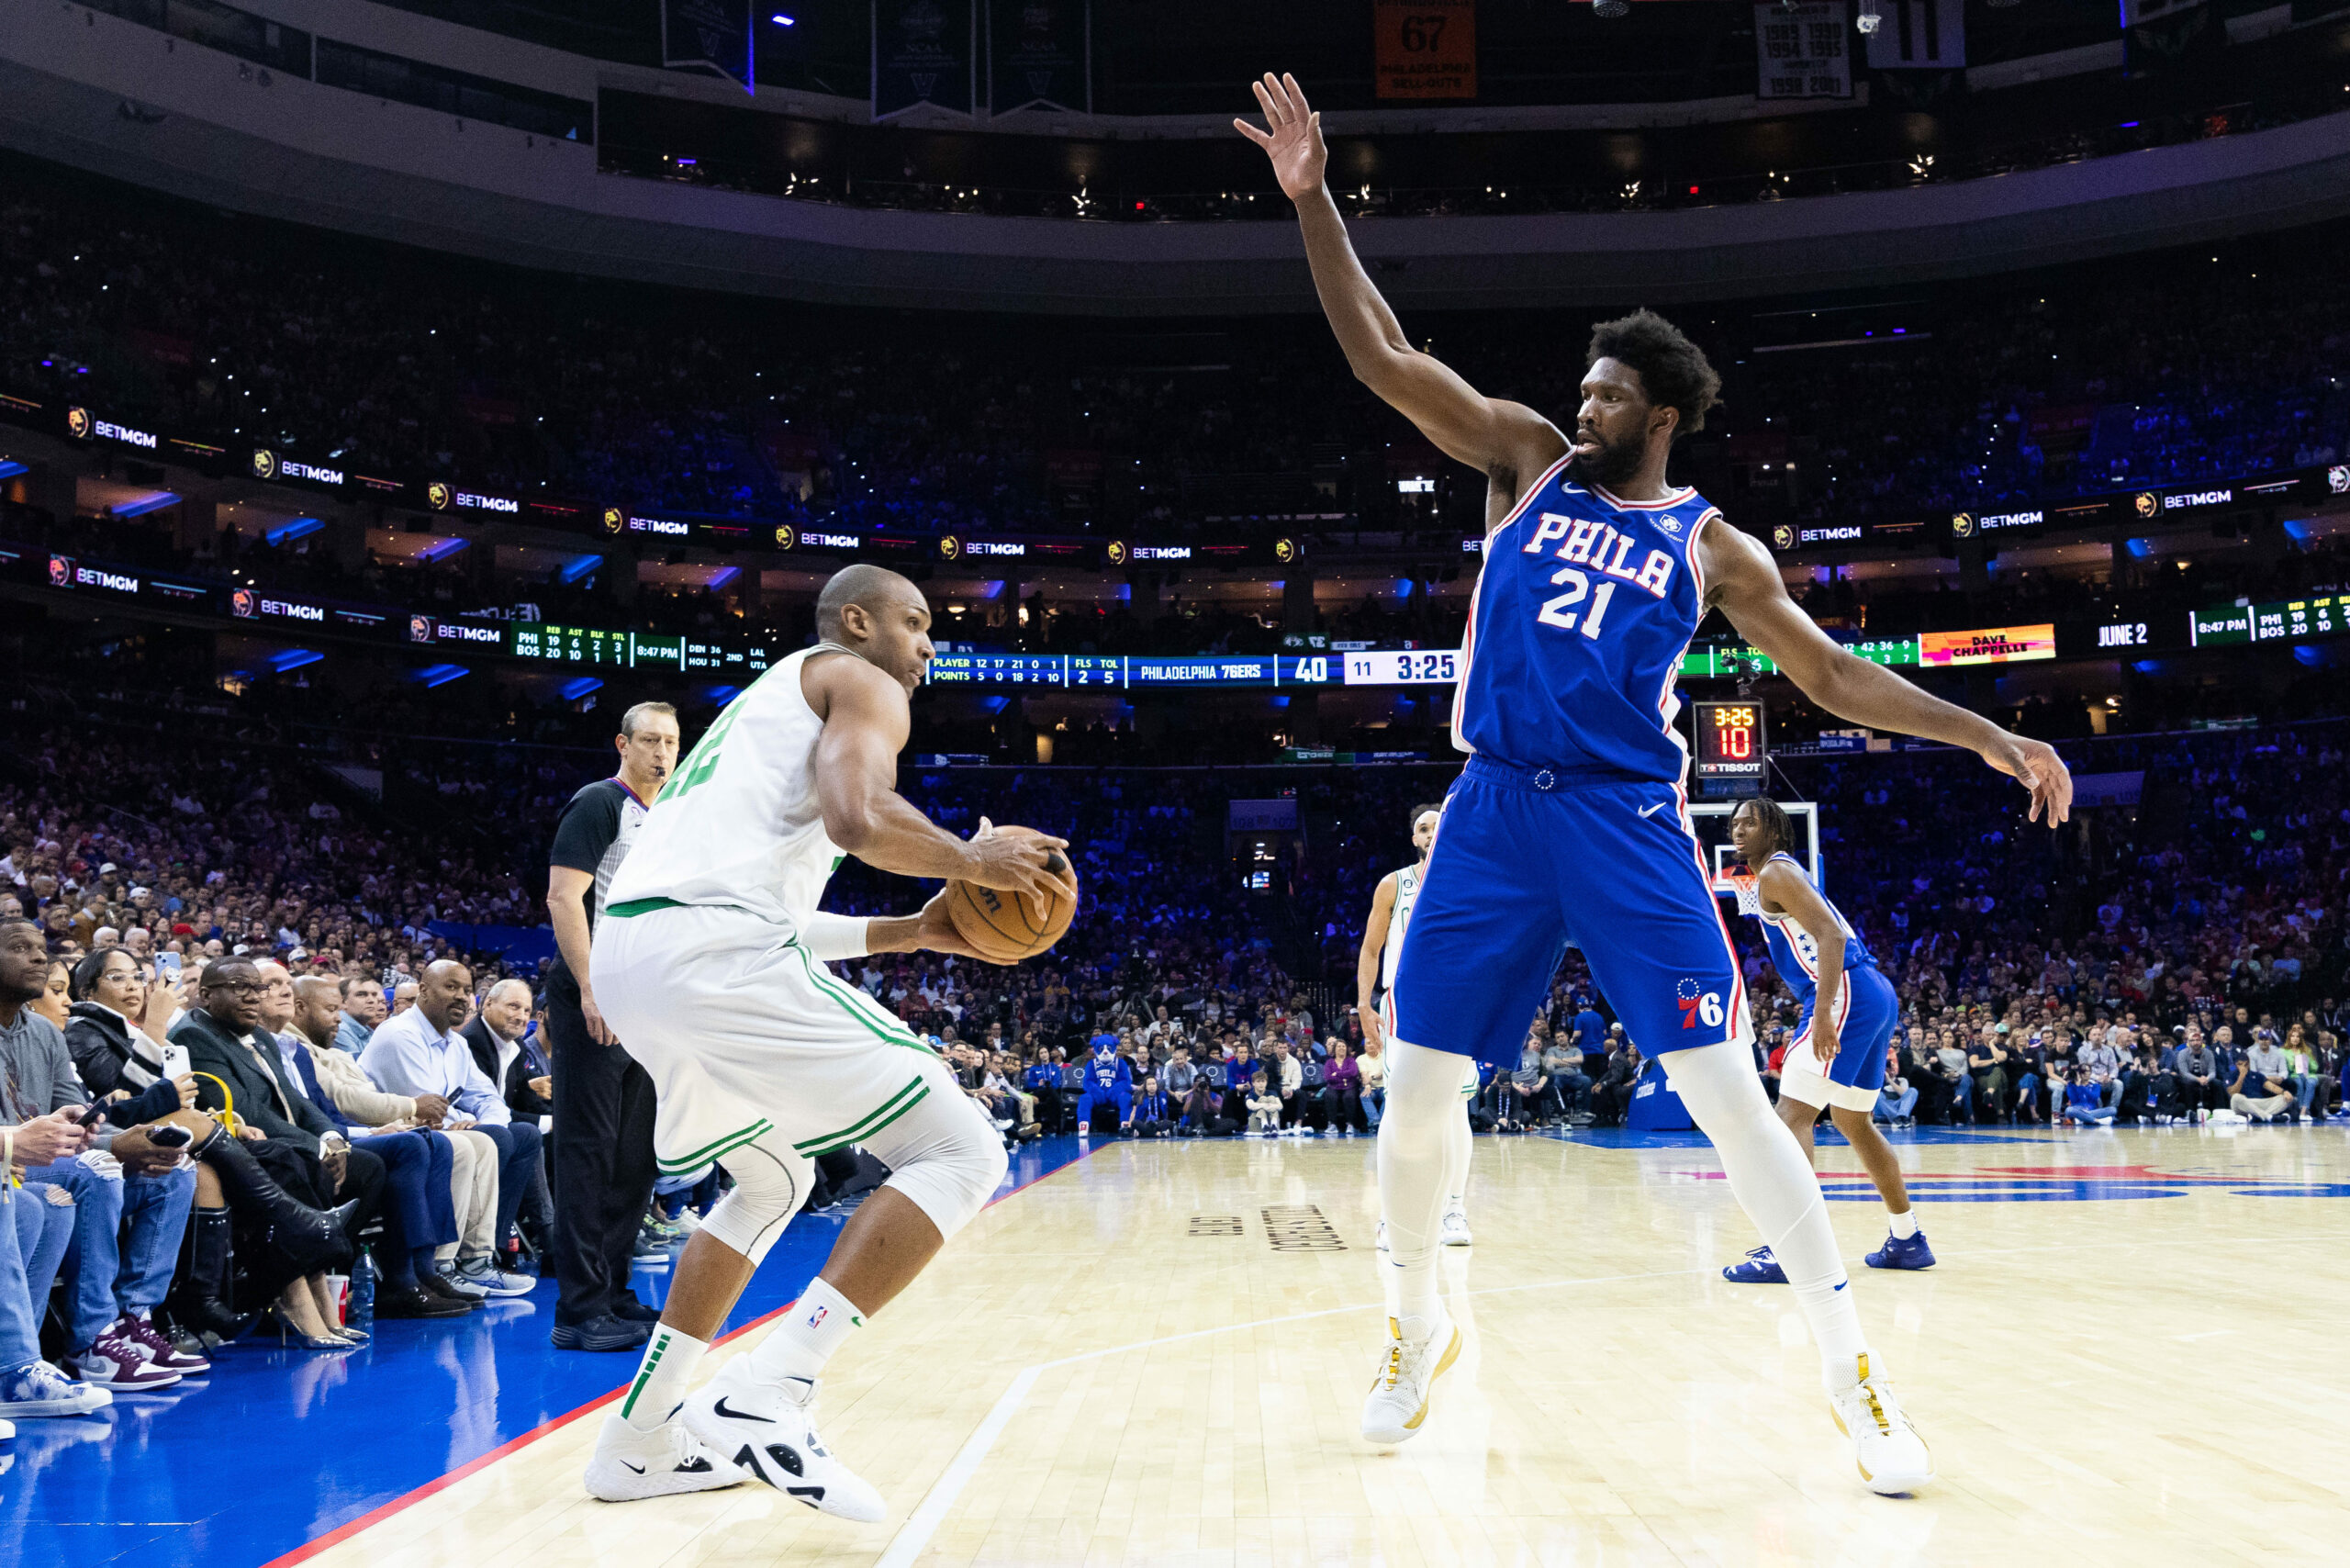 Player grades: Joel Embiid dominates to lead Sixers past Celtics at home